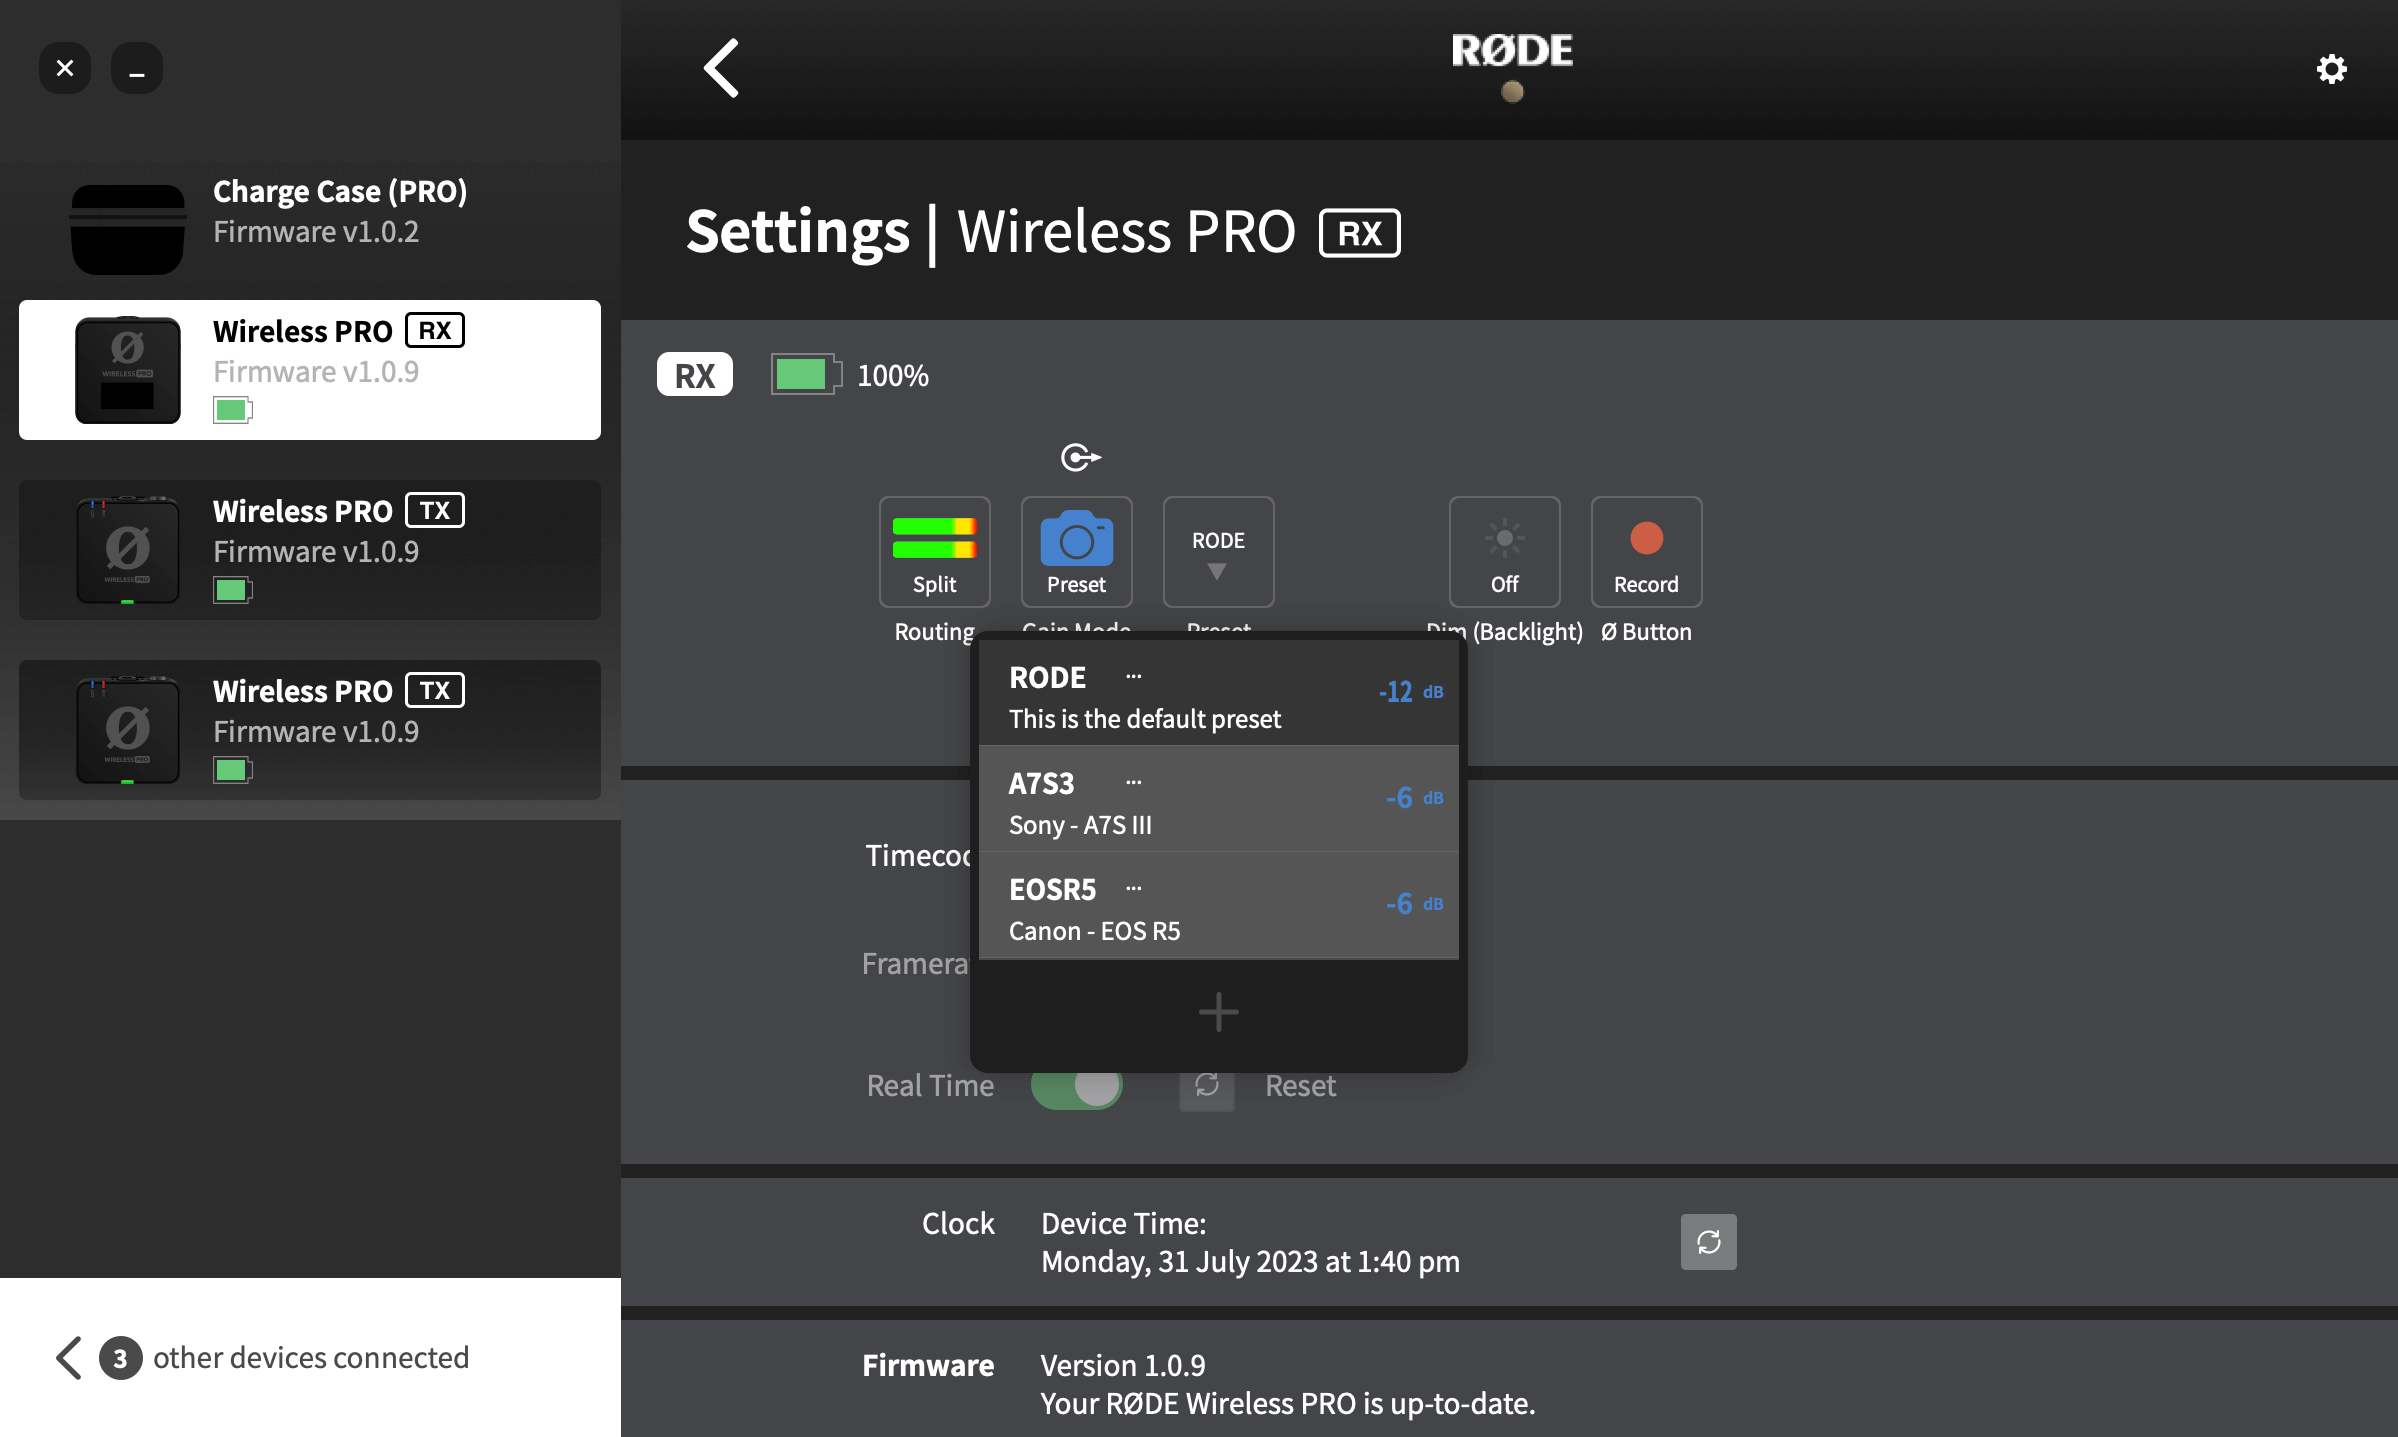 Camera presets in RØDE Central for Wireless PRO